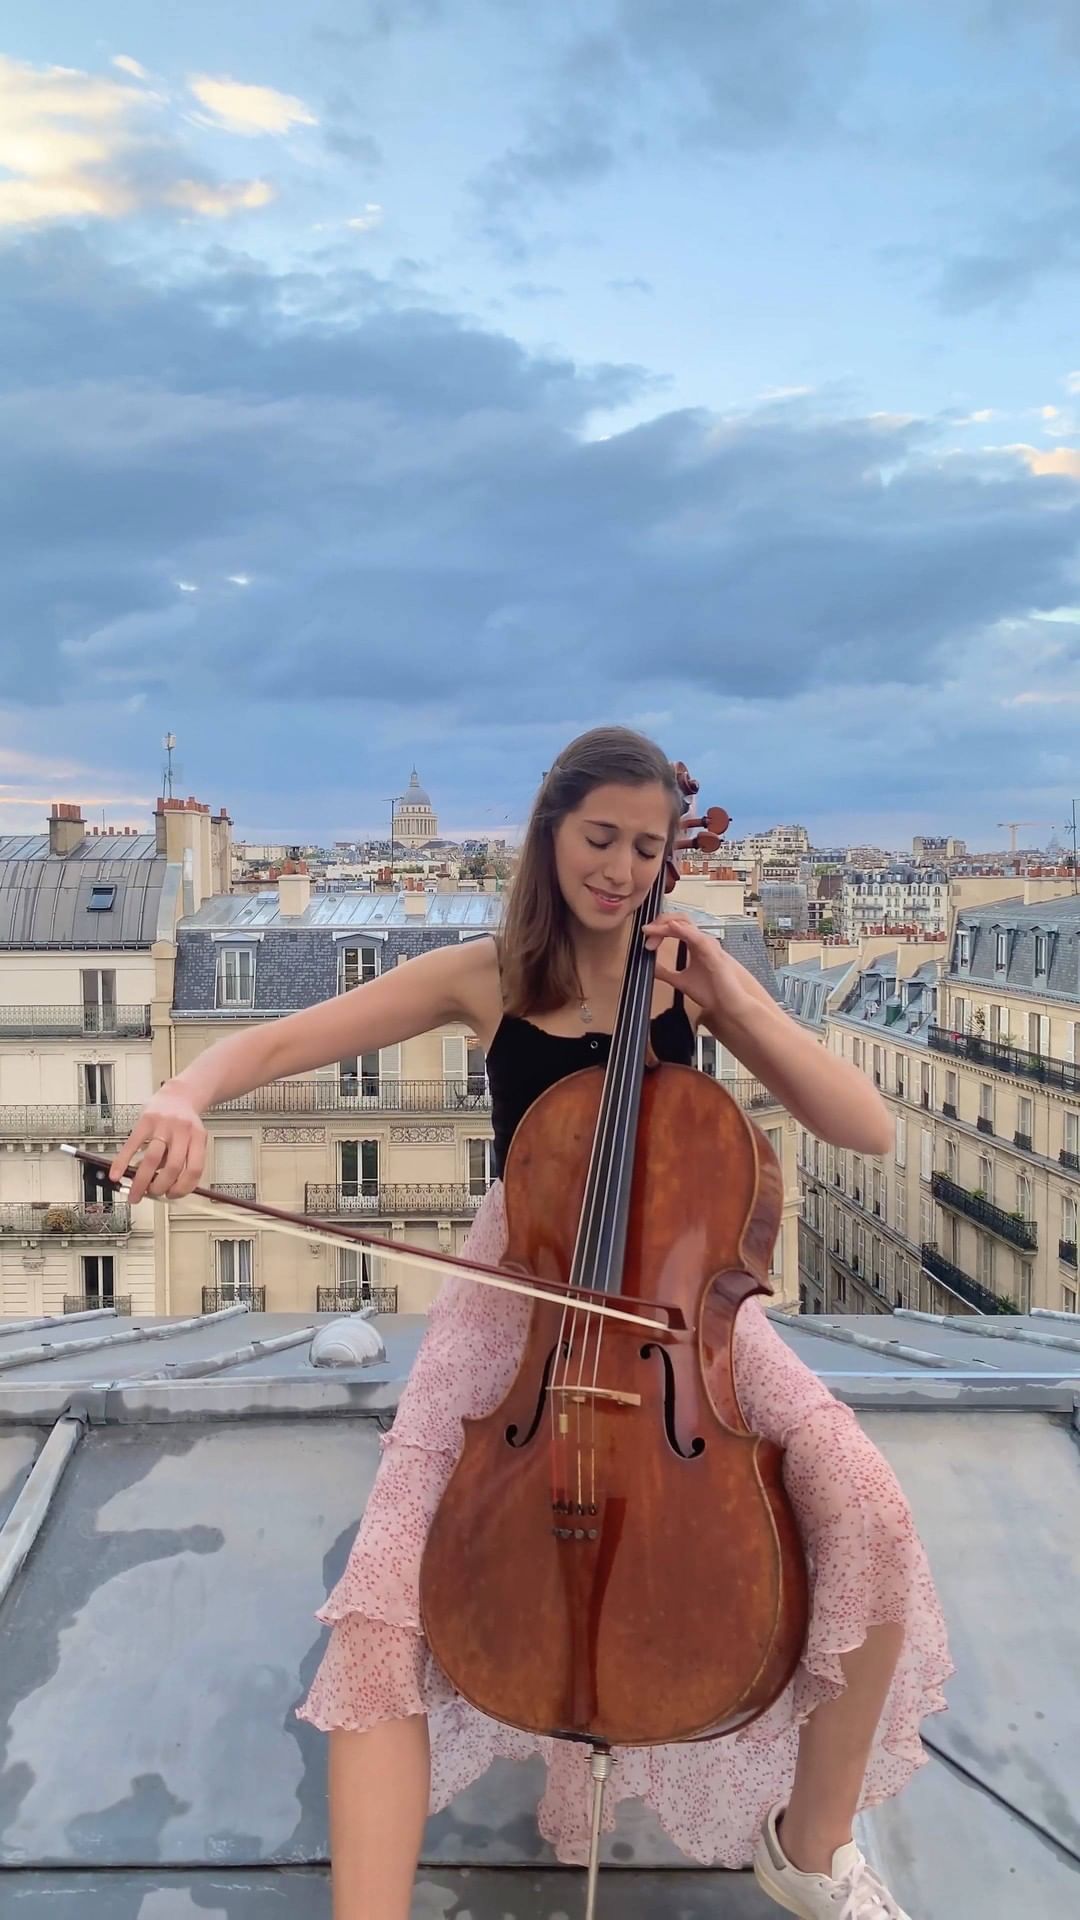 Stella McCartney - Cellist @CamilleThomasCellist shares one of her iconic Parisian rooftop performances, giving a moving rendition of La Vie en Rose for #Stellafest. ⁣
⁣
Catch even more exclusive perf...